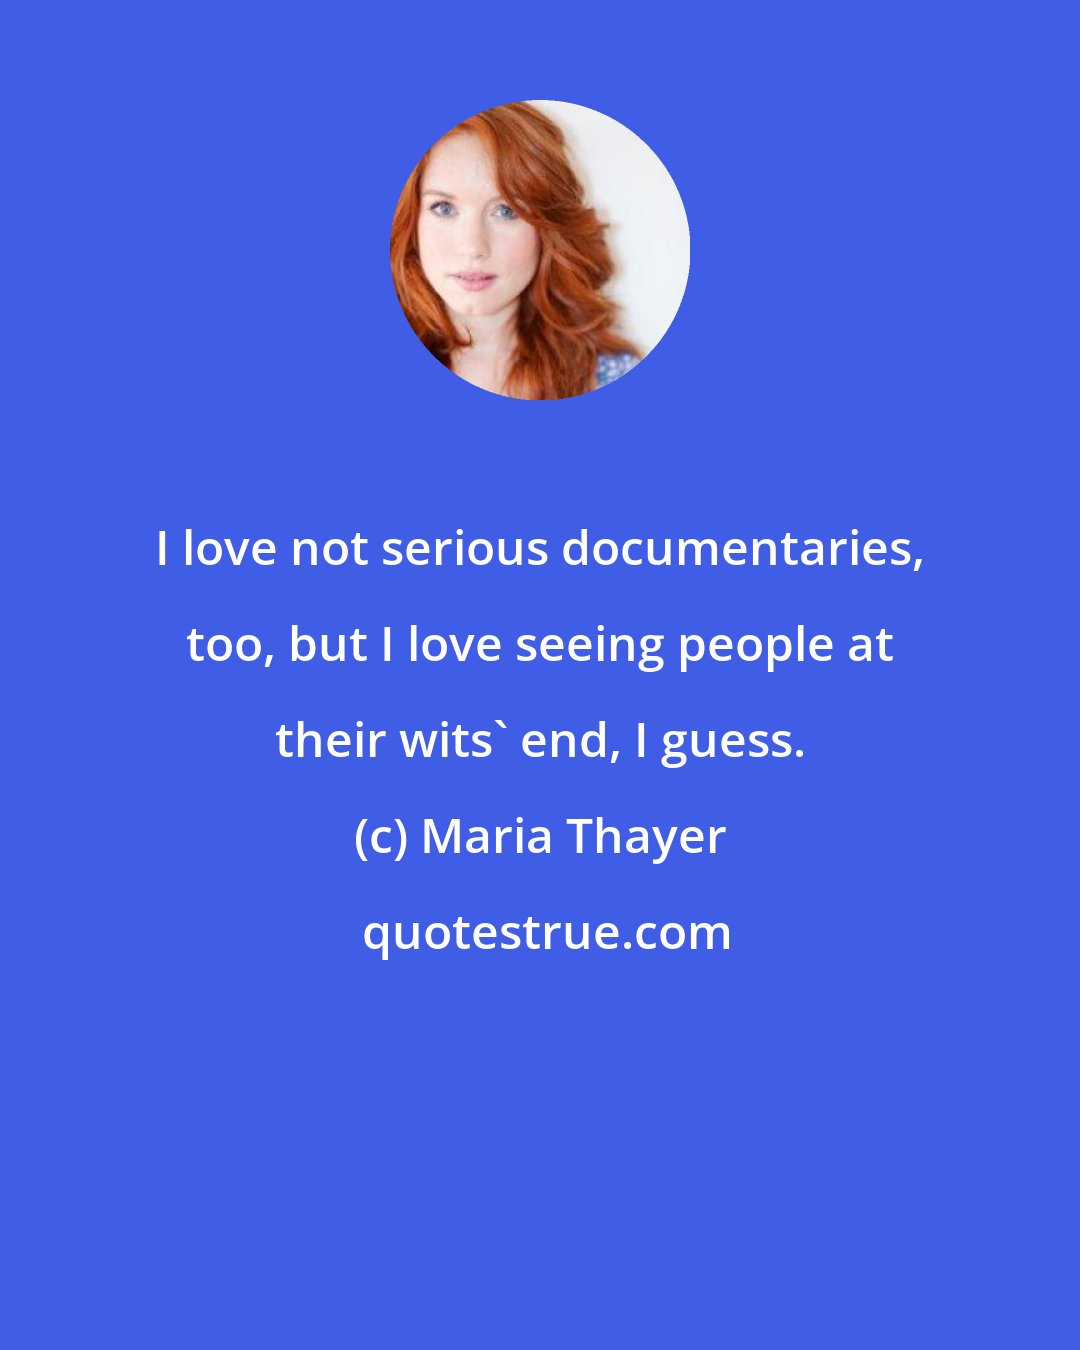 Maria Thayer: I love not serious documentaries, too, but I love seeing people at their wits' end, I guess.